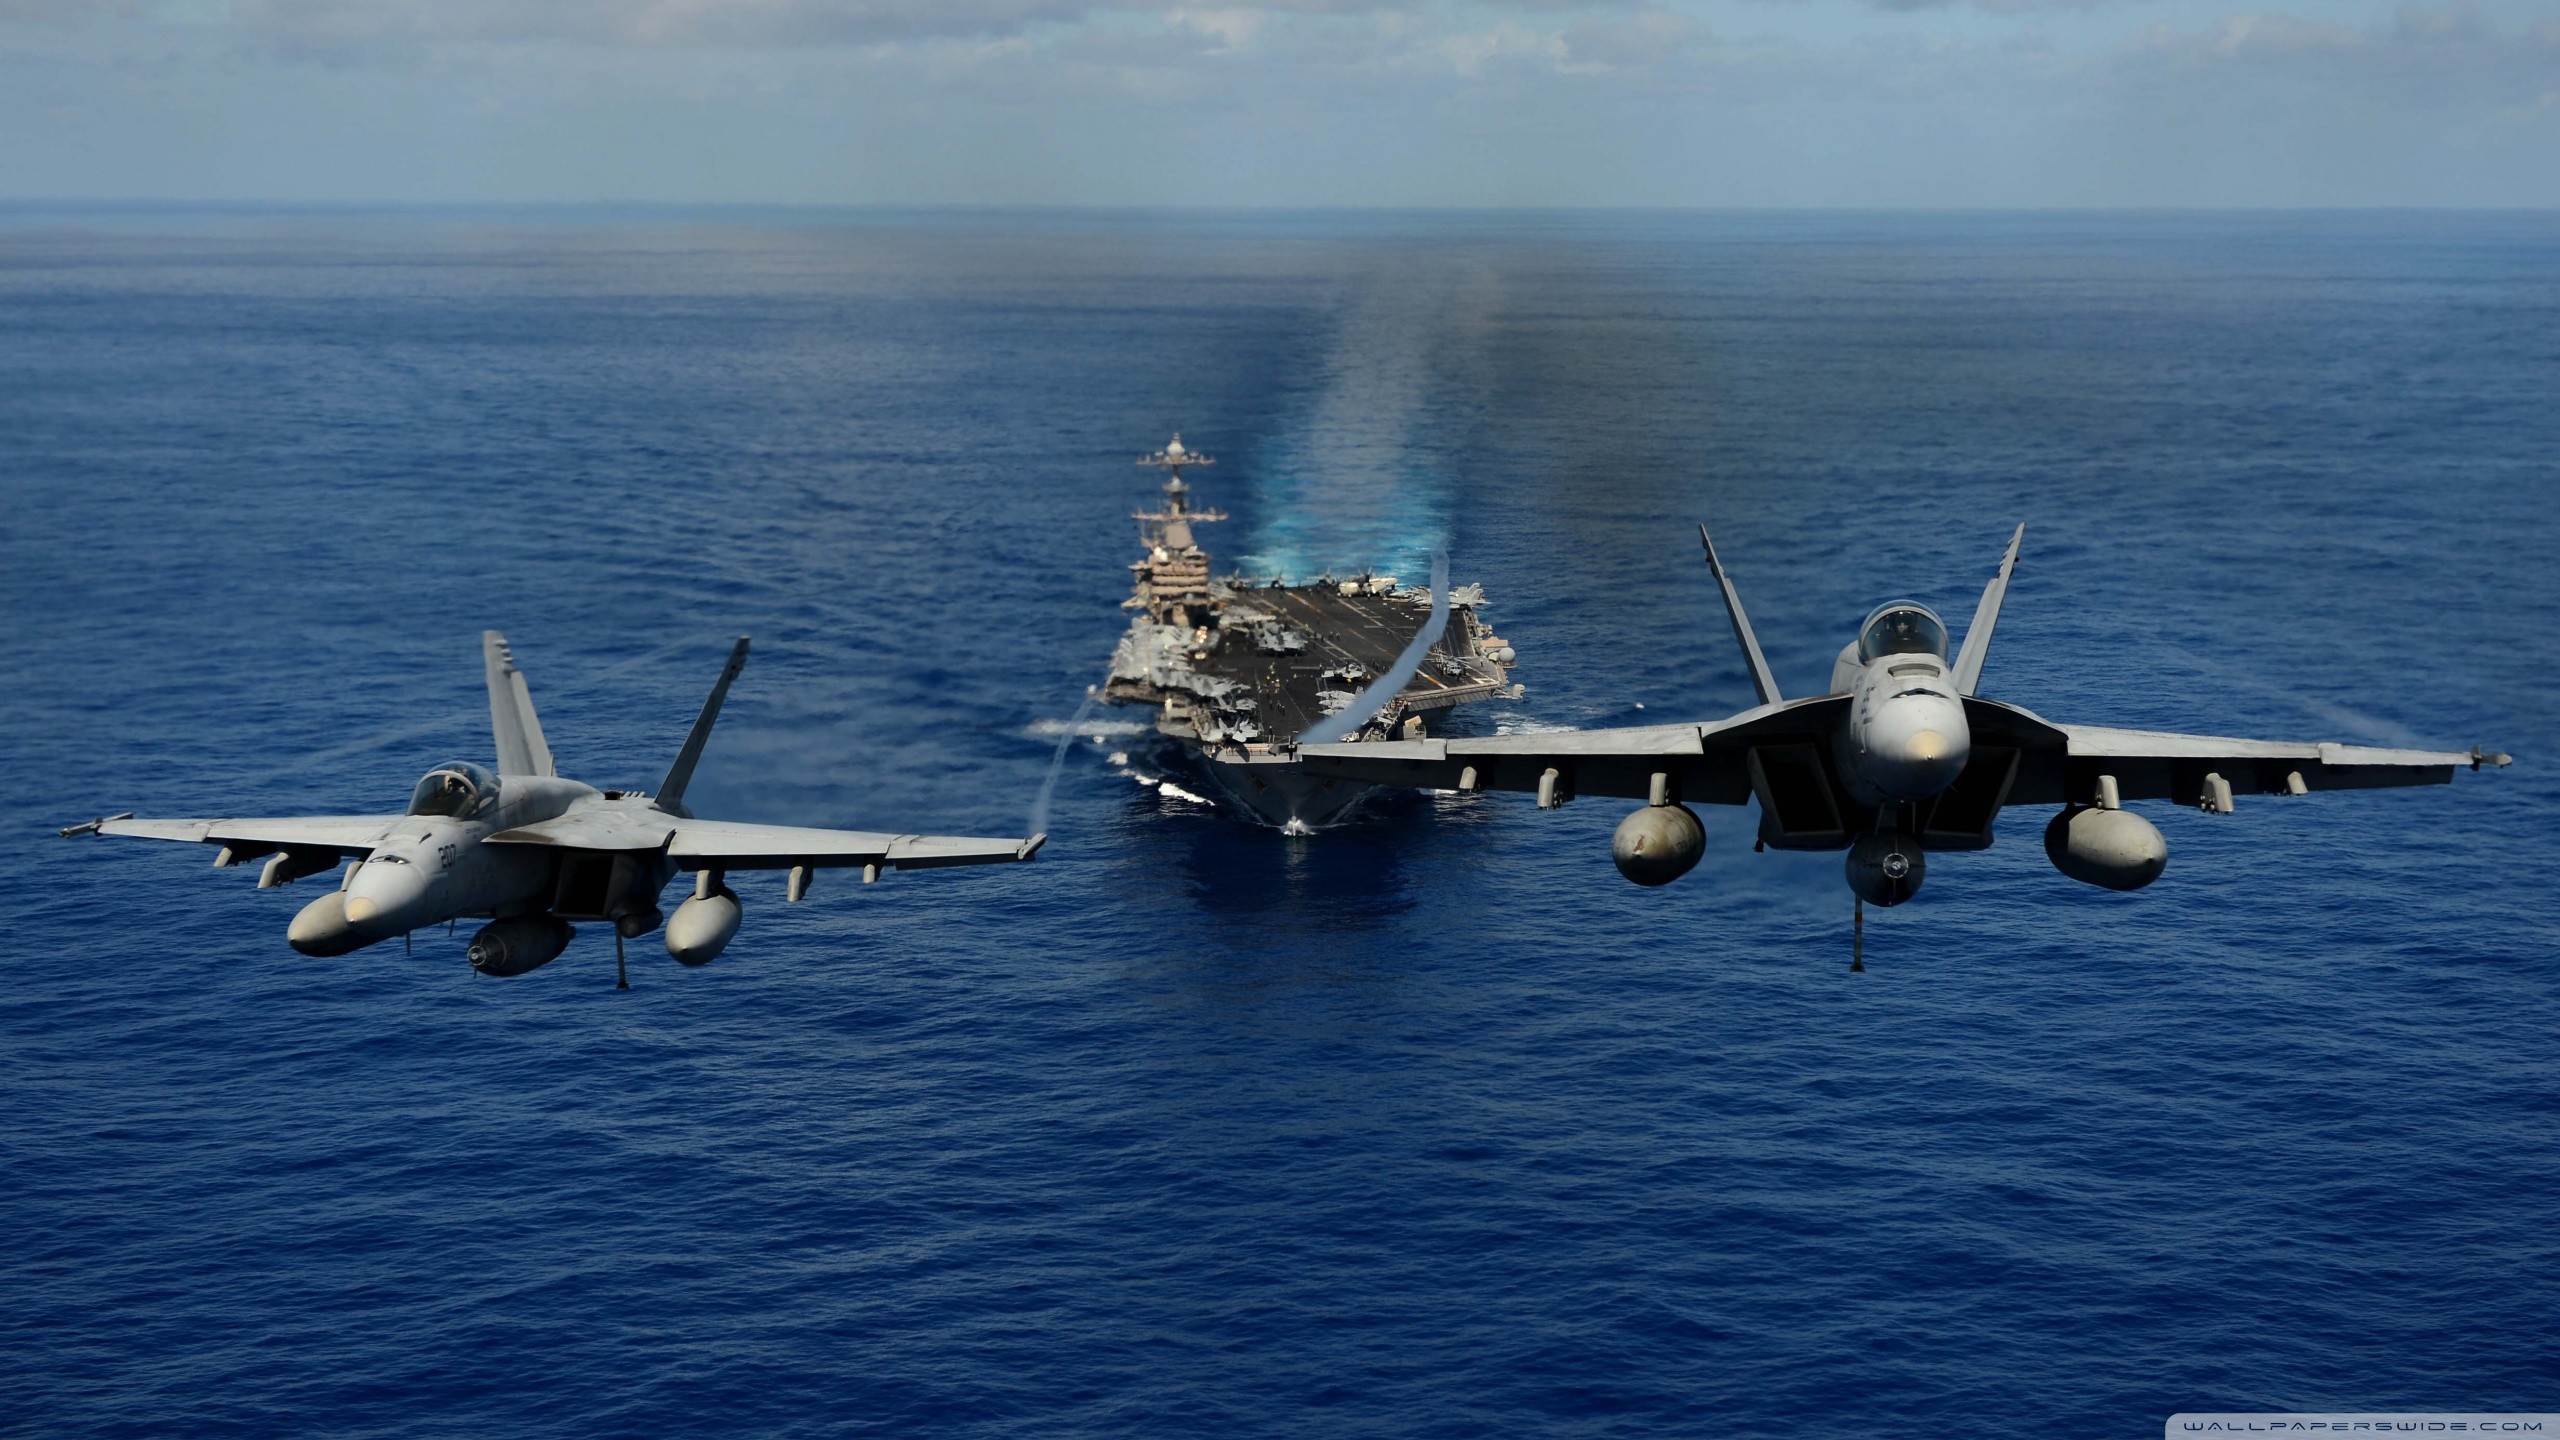 2560x1440 Search Results for “us navy wallpapers hd” – Adorable Wallpapers